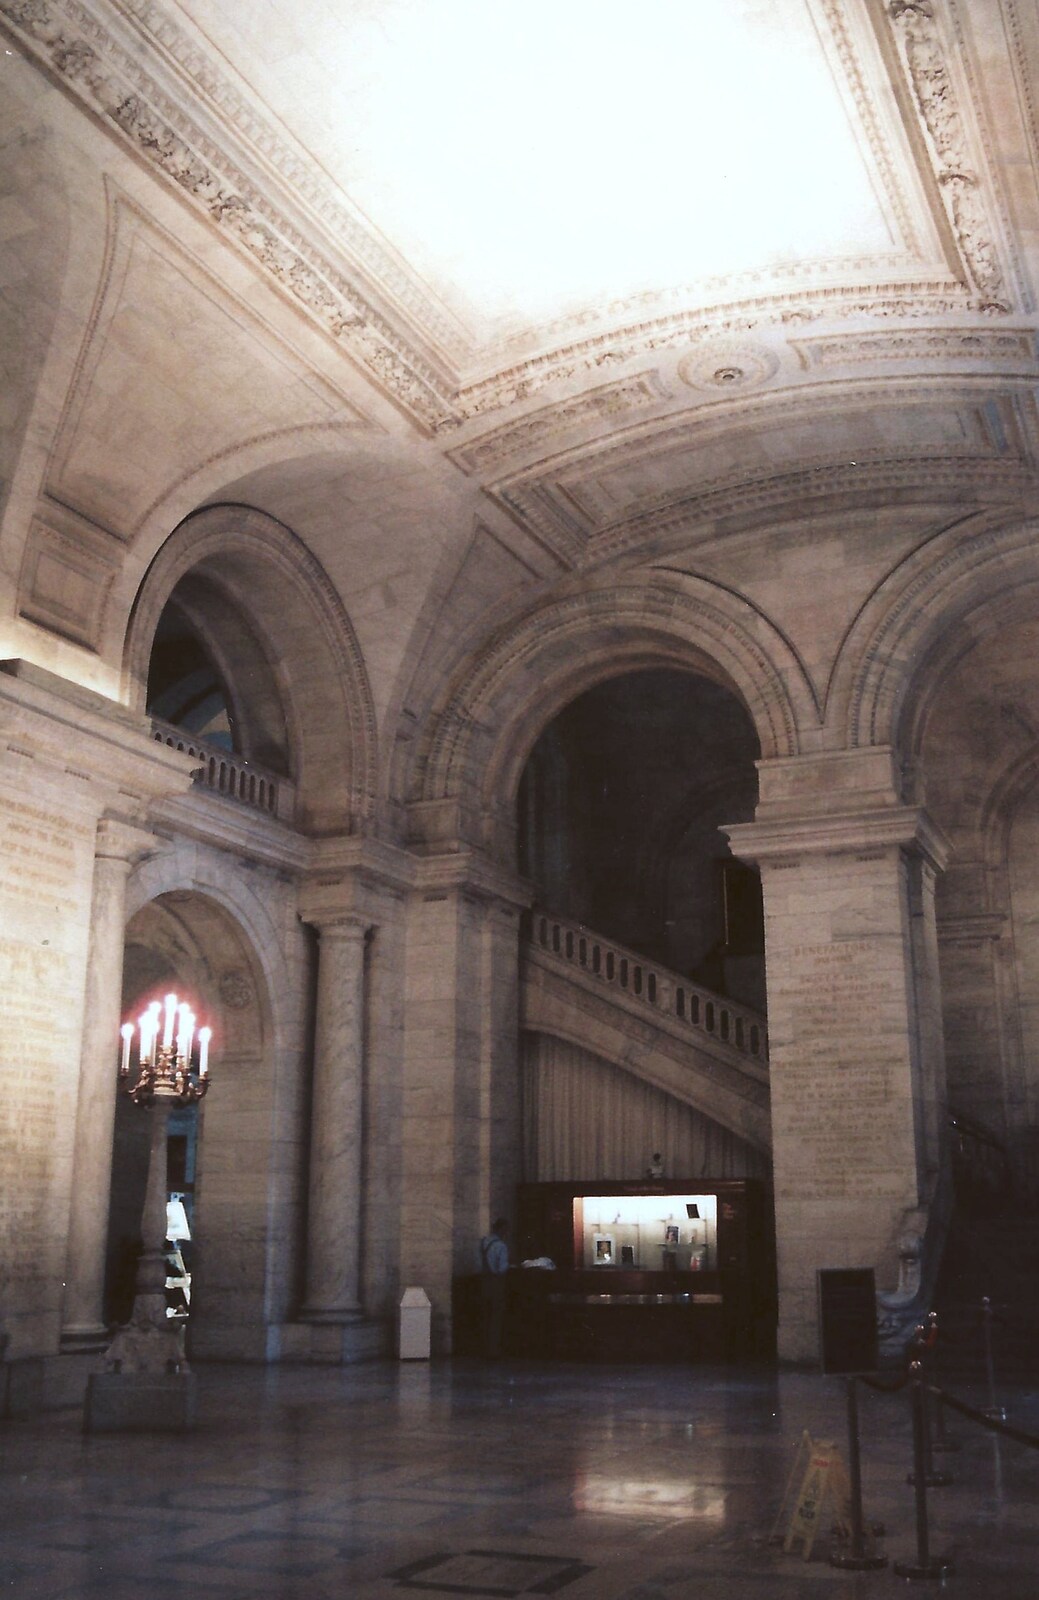 A Trip to New York, New York, USA - 11th March 1995: The New York public library's grand entrance